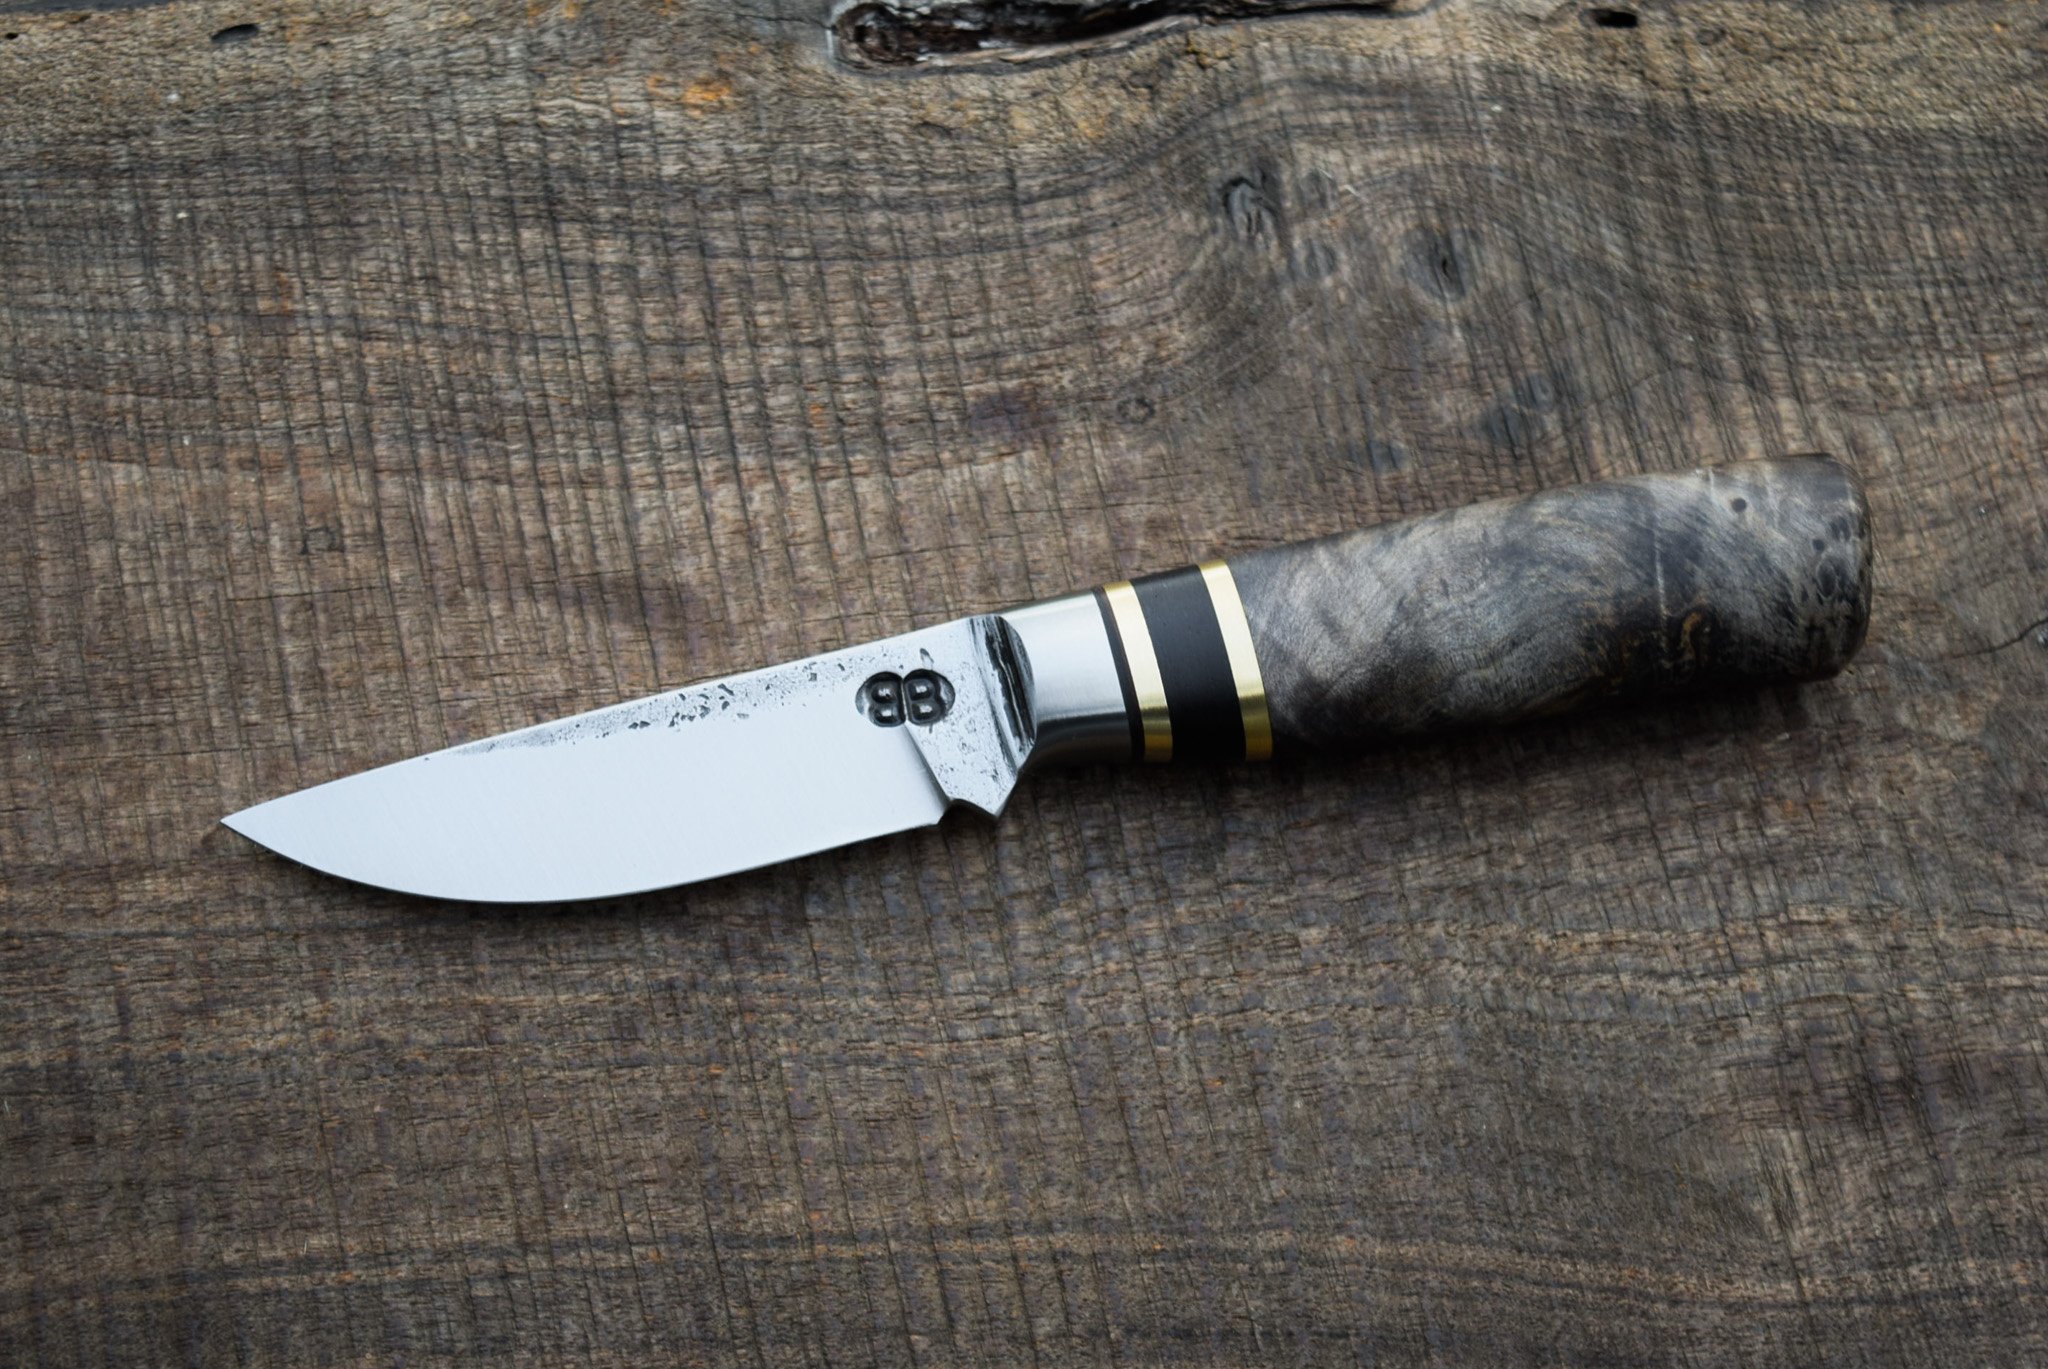  3.5" Integral Skinner. Integral Black-Dyed Maple Handle with Blackwood and Brass Spacers. 